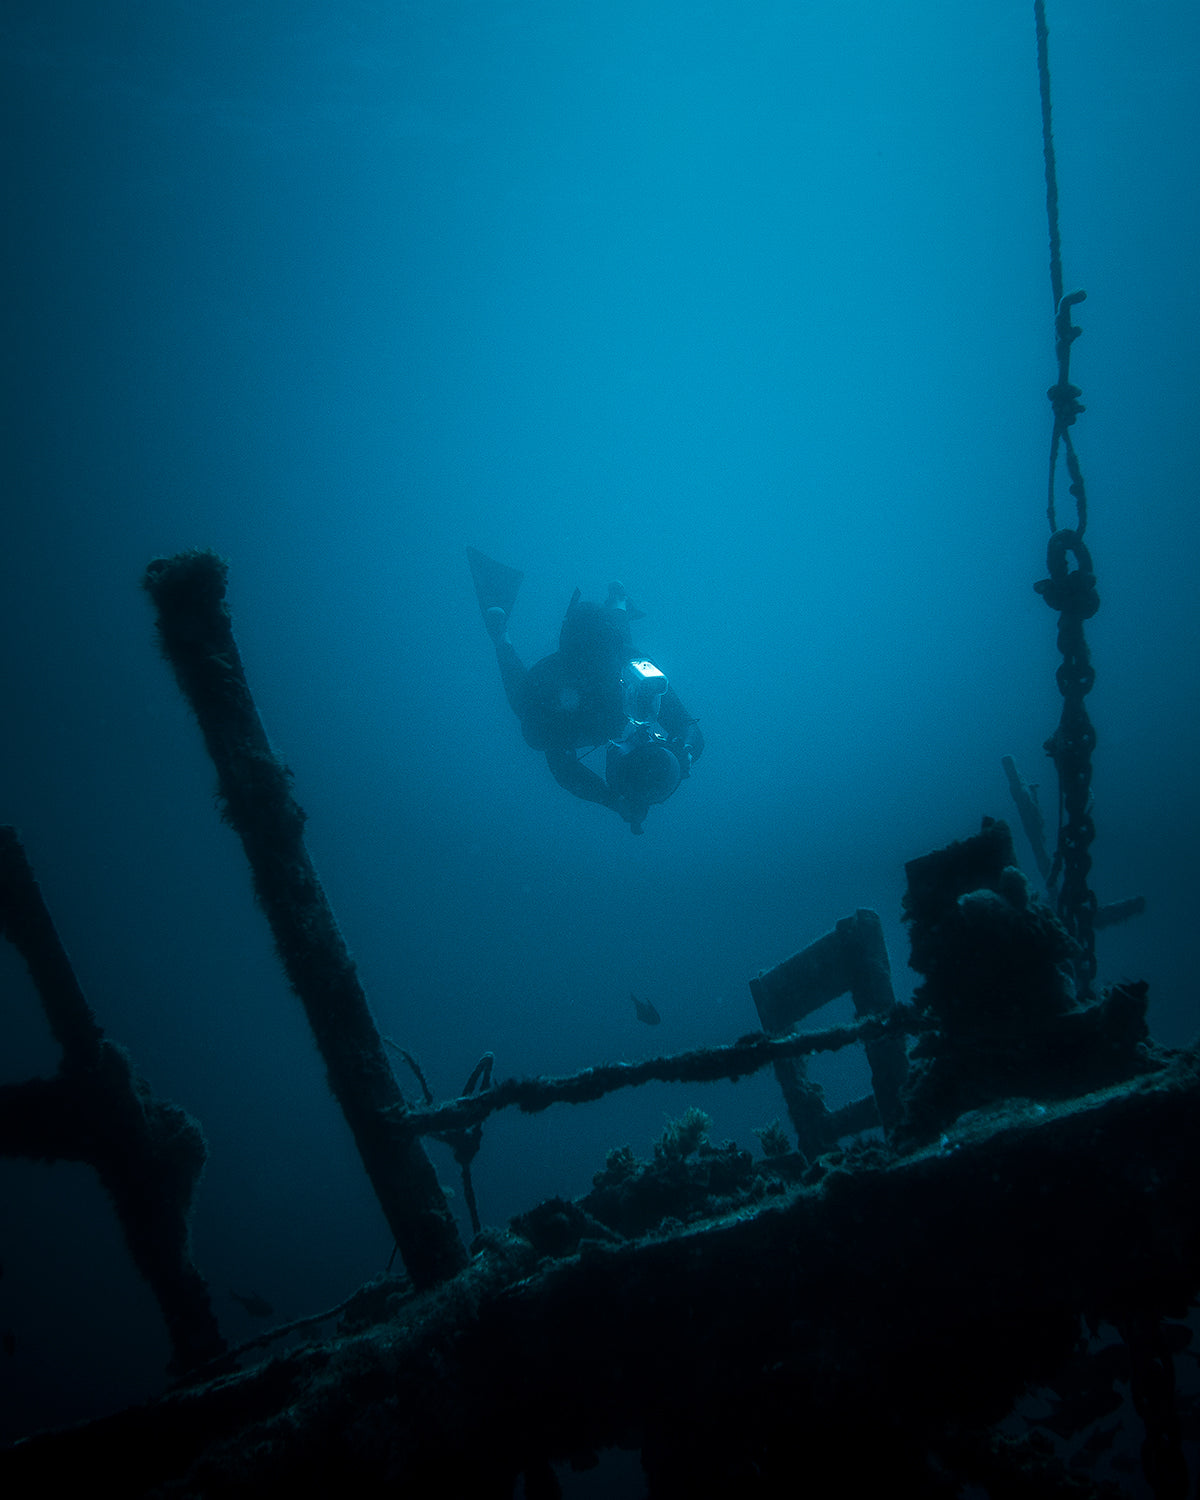 Thurston Photo Diving the HMAS ship wreck with Aquatech and One Ocean International